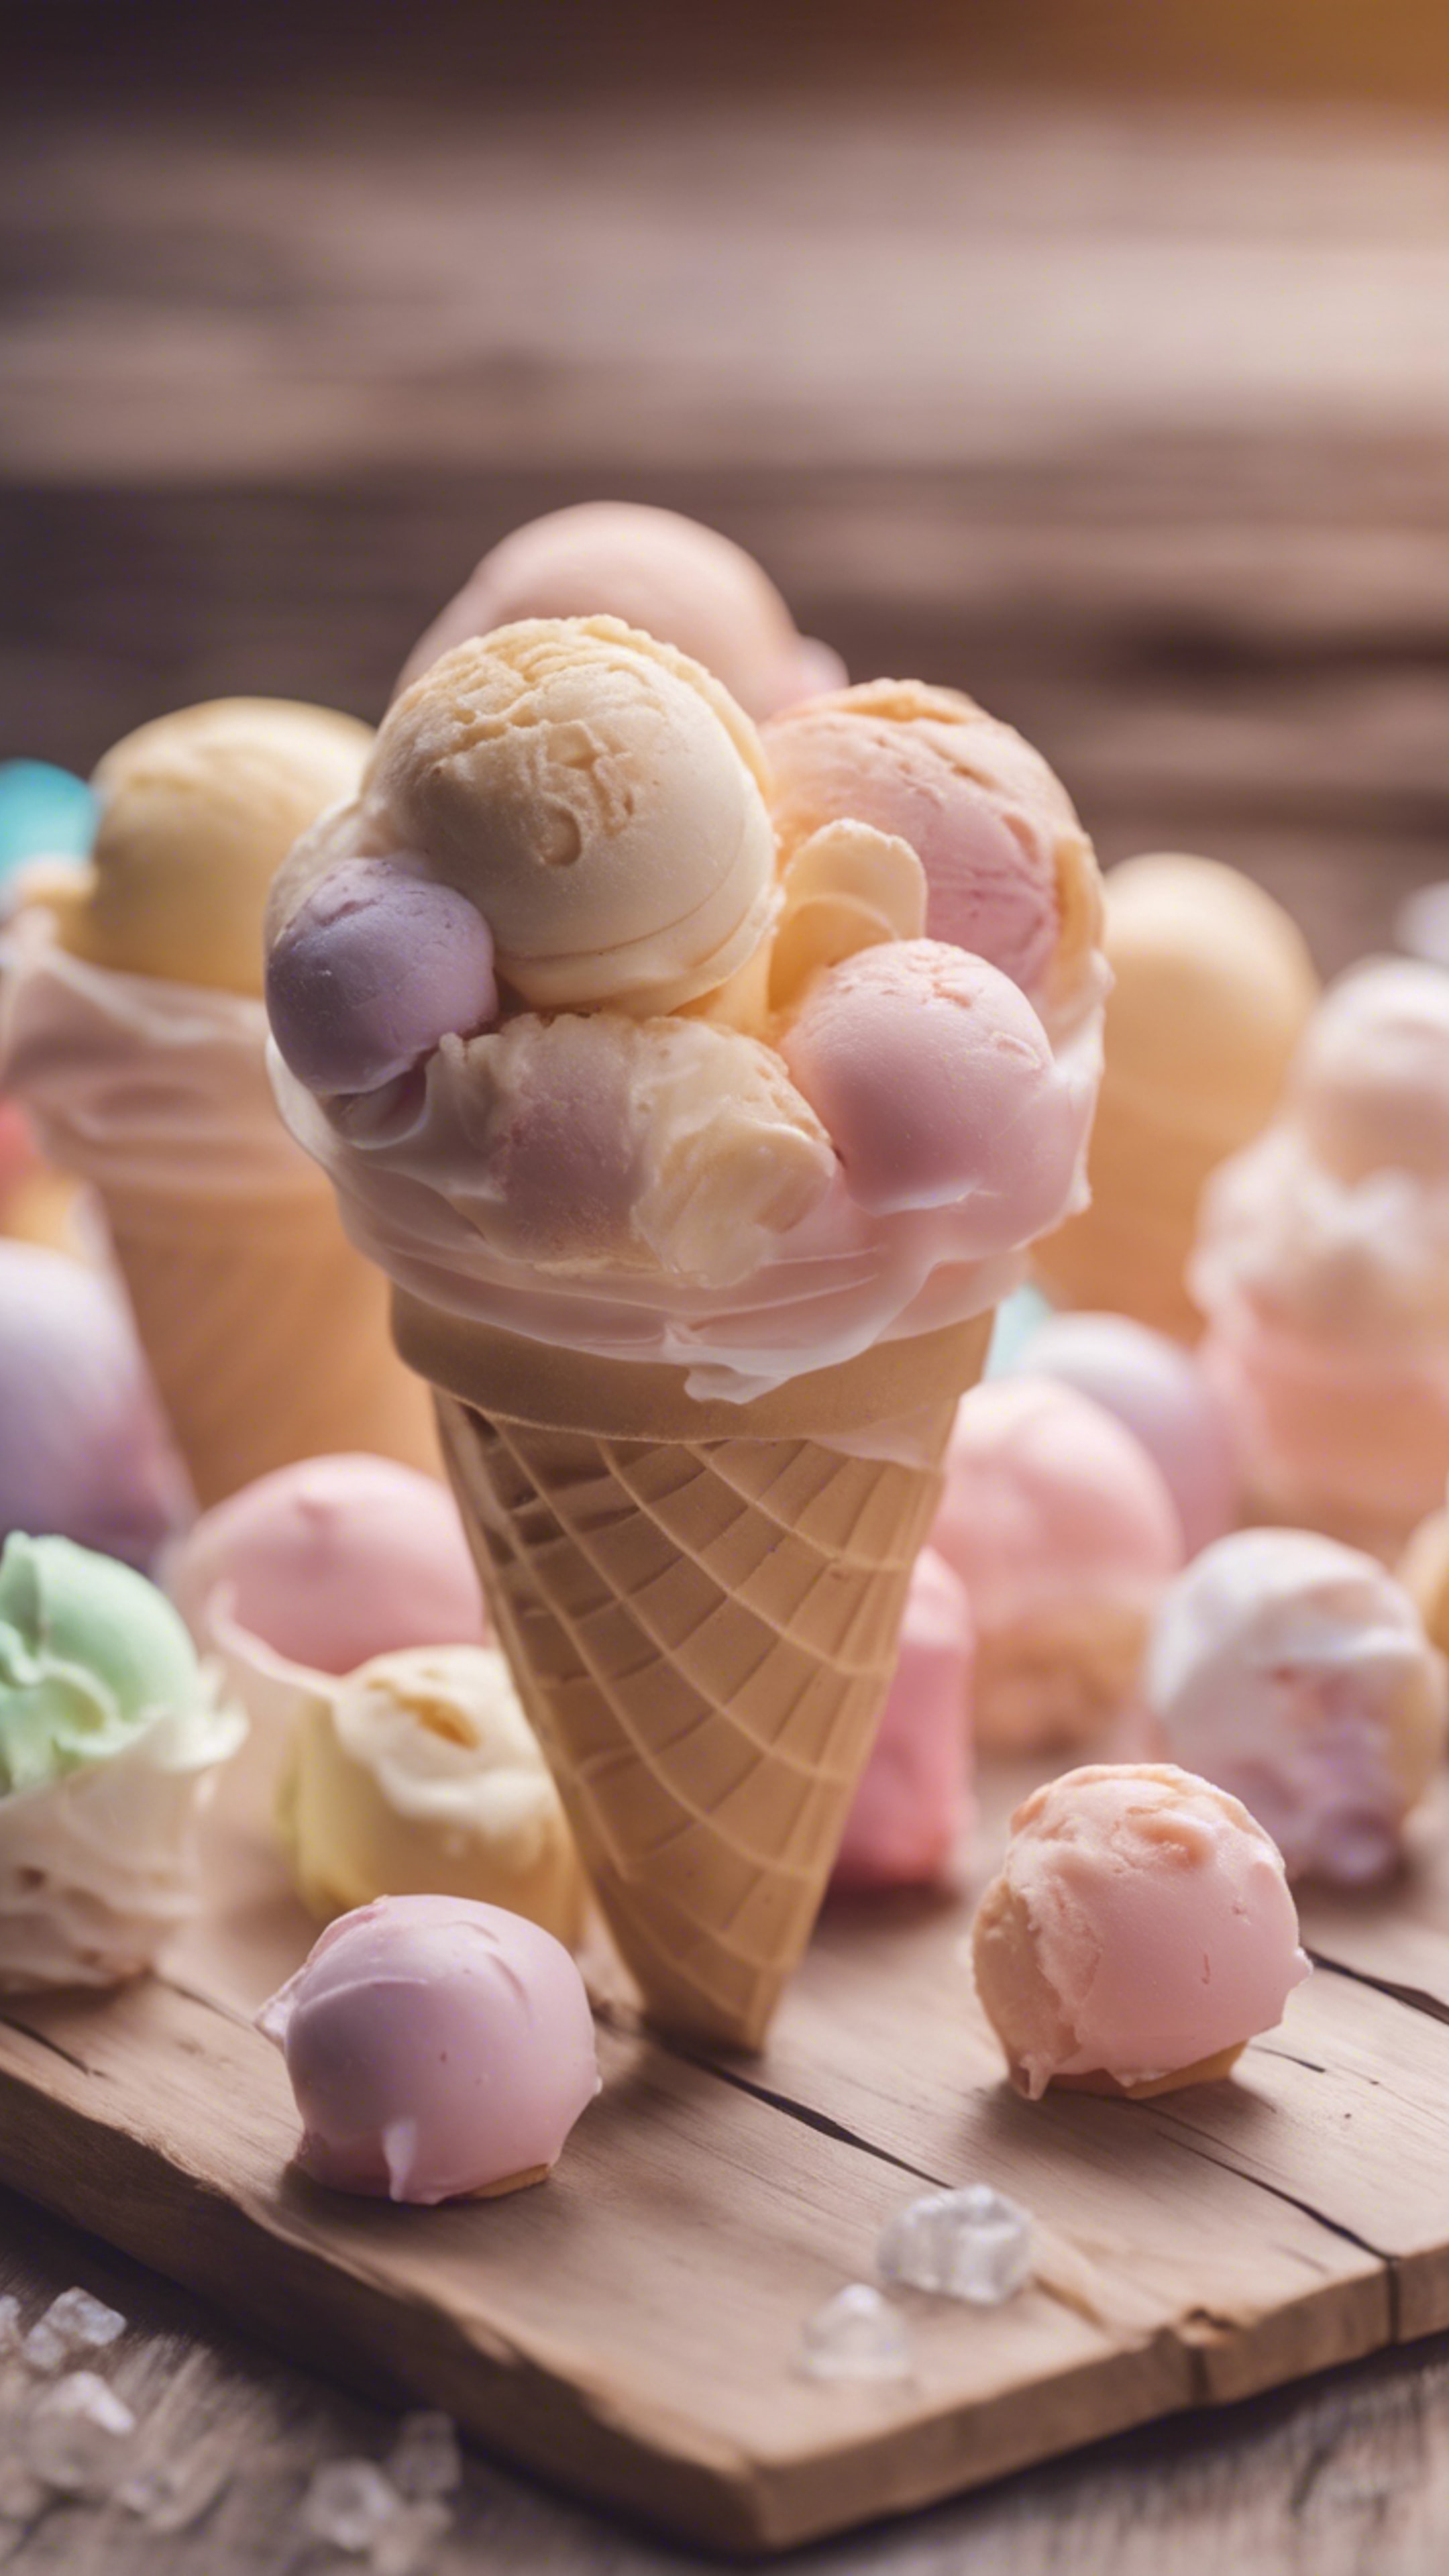 Beige pastel ice-cream themed kawaii sweets placed on a wooden table. Wallpaper[0134c6788c9a41089b13]